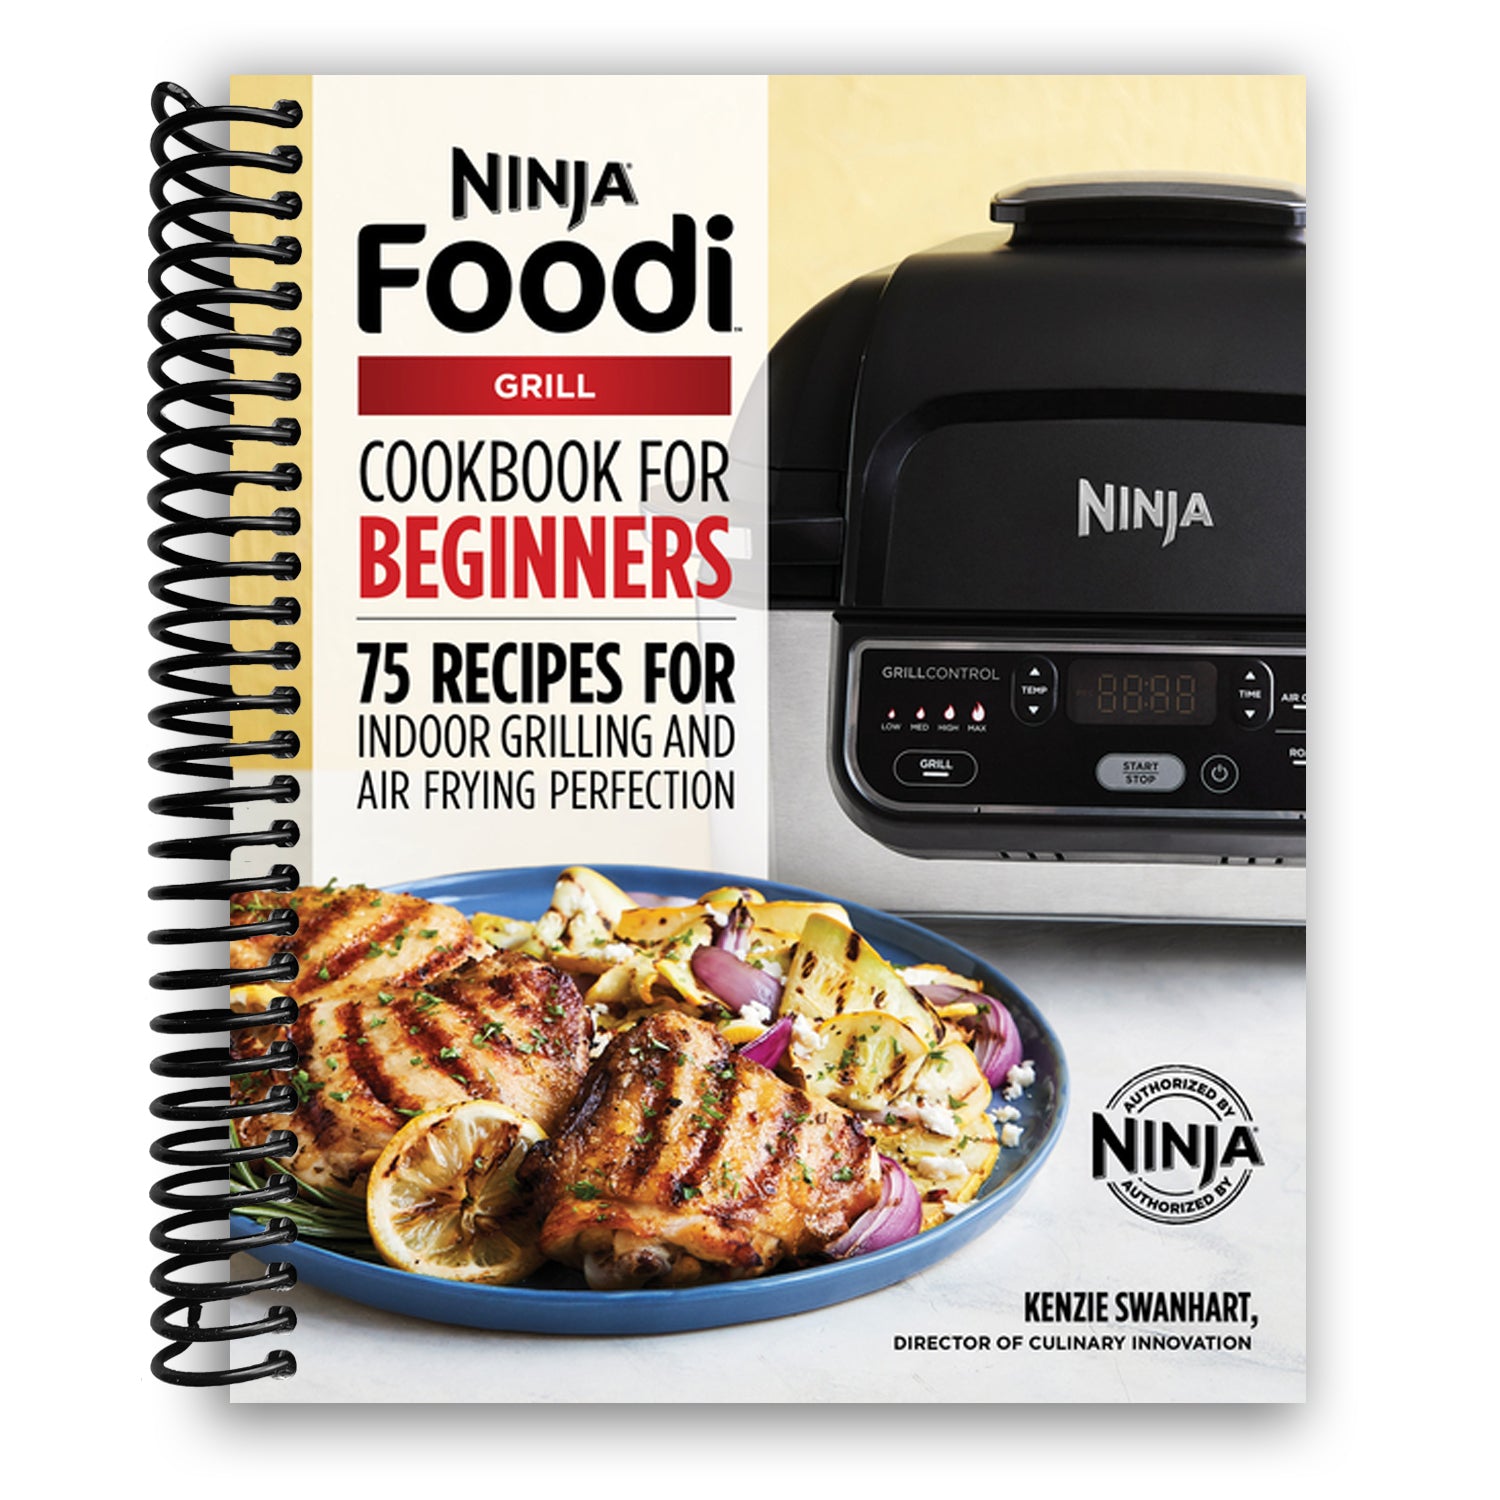 Ninja Foodi Grill Cookbook: 100 Easy, Quick and Delicious Recipes for Indoor Grilling and Air Frying Perfection [Book]